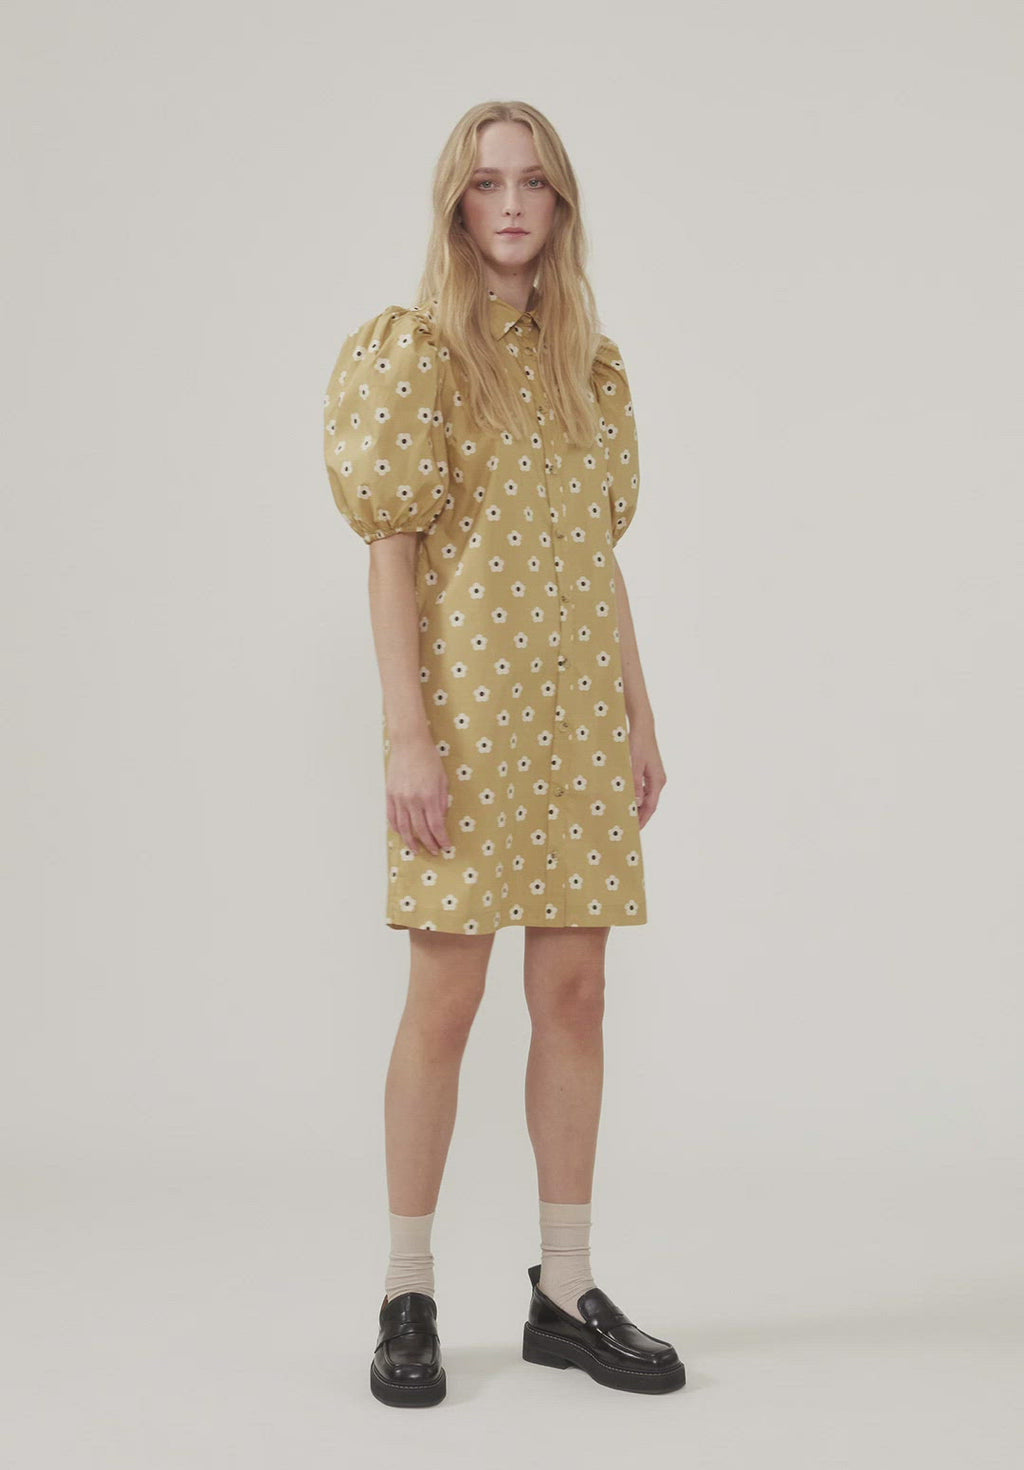 Dress in a printed organic cotton with a straight silhouette. RossaMD print dress has a collar and button closure with voluminous puff sleeves with elasticated trim. The model is 173 cm and wears a size S/36